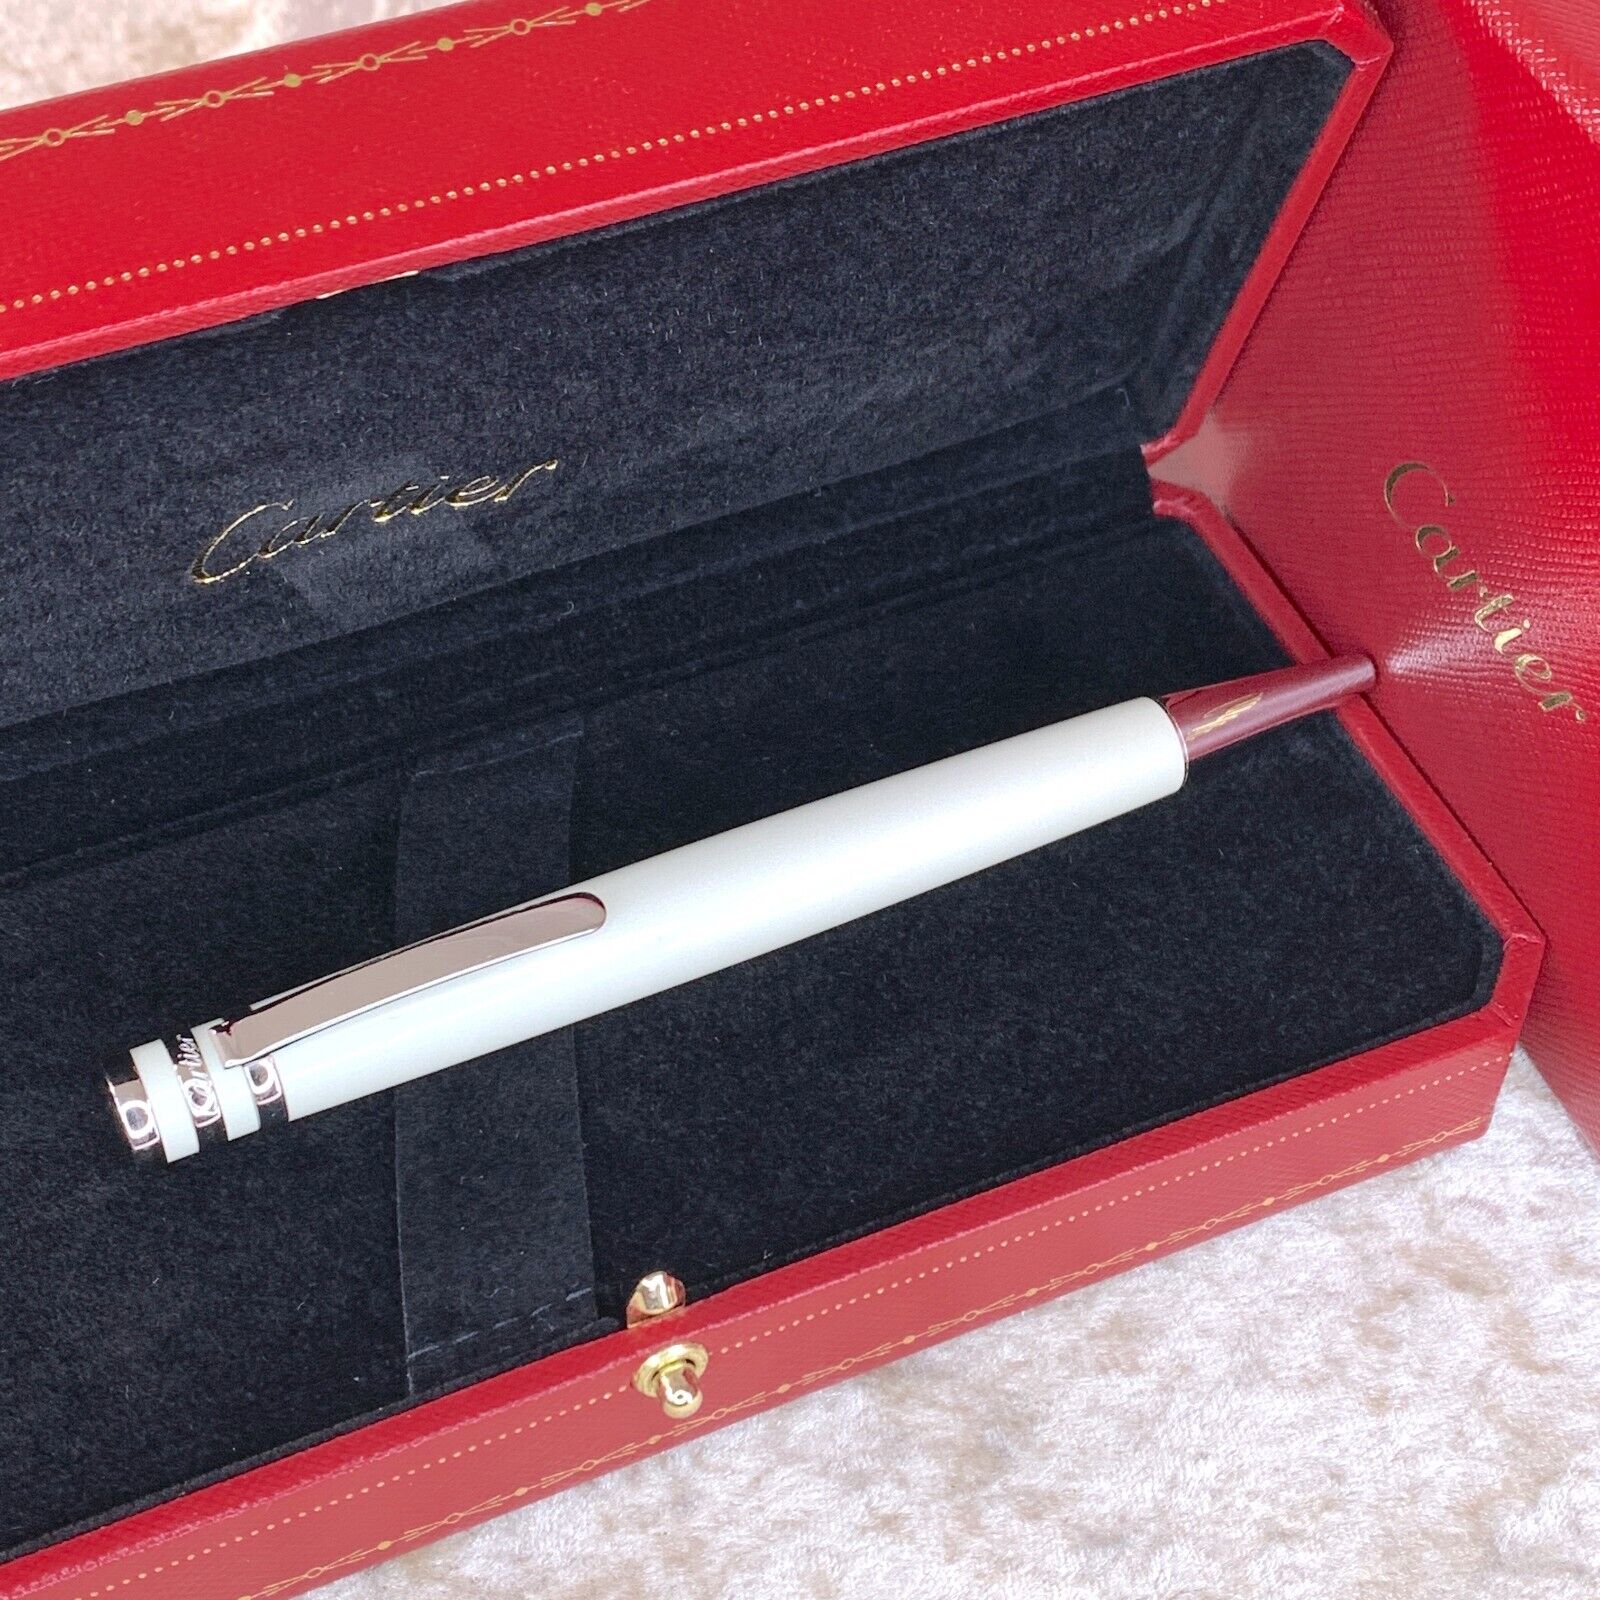 Authentic Cartier Ballpoint Pen Trinity Pearl White Lacquer Finish